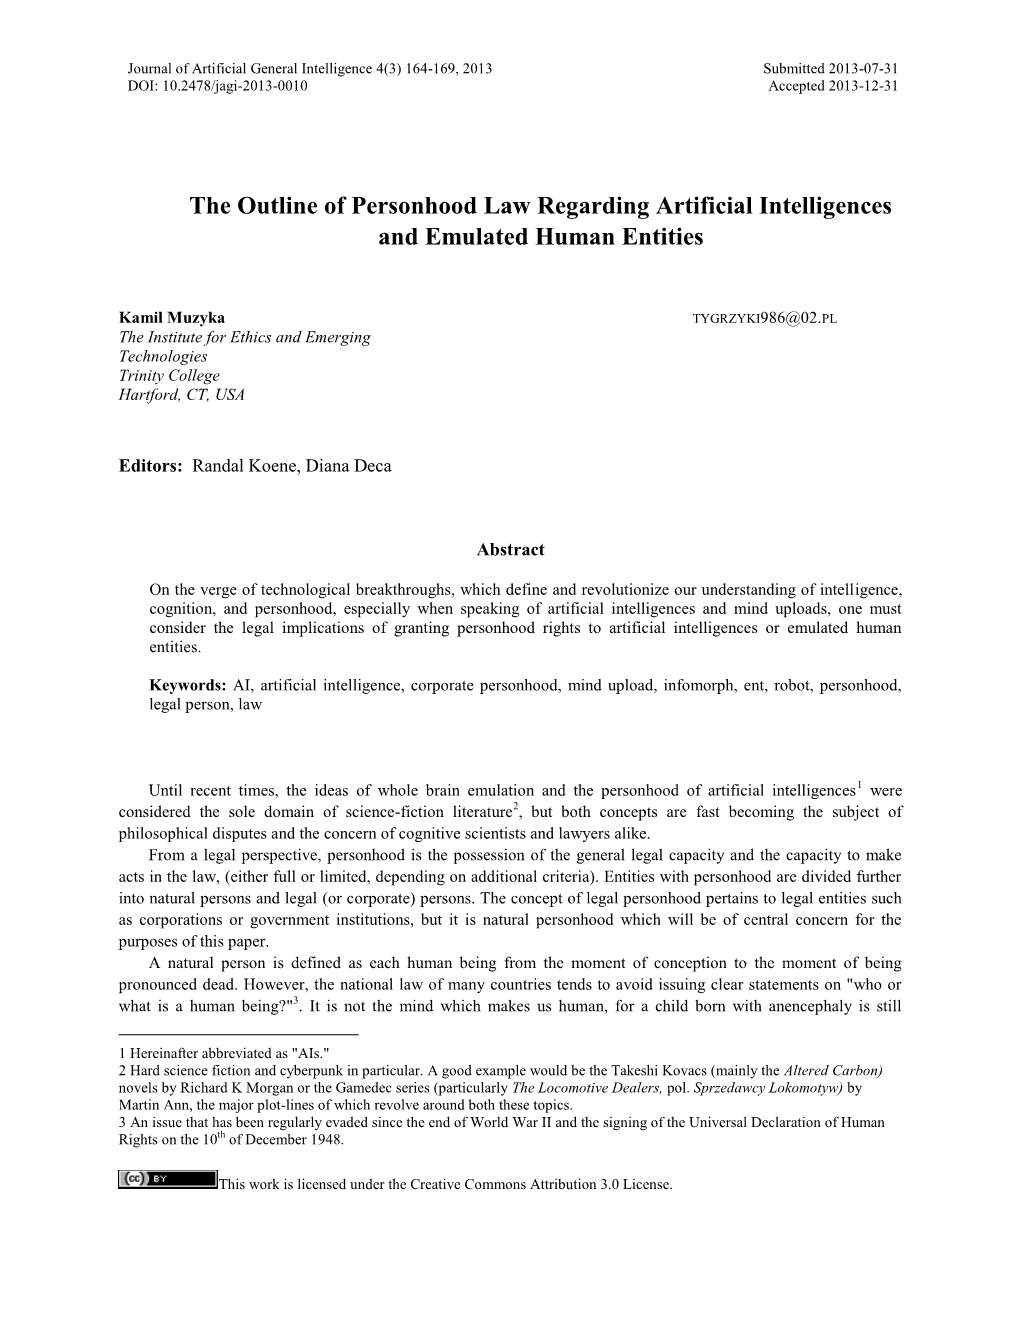 The Outline of Personhood Law Regarding Artificial Intelligences and Emulated Human Entities